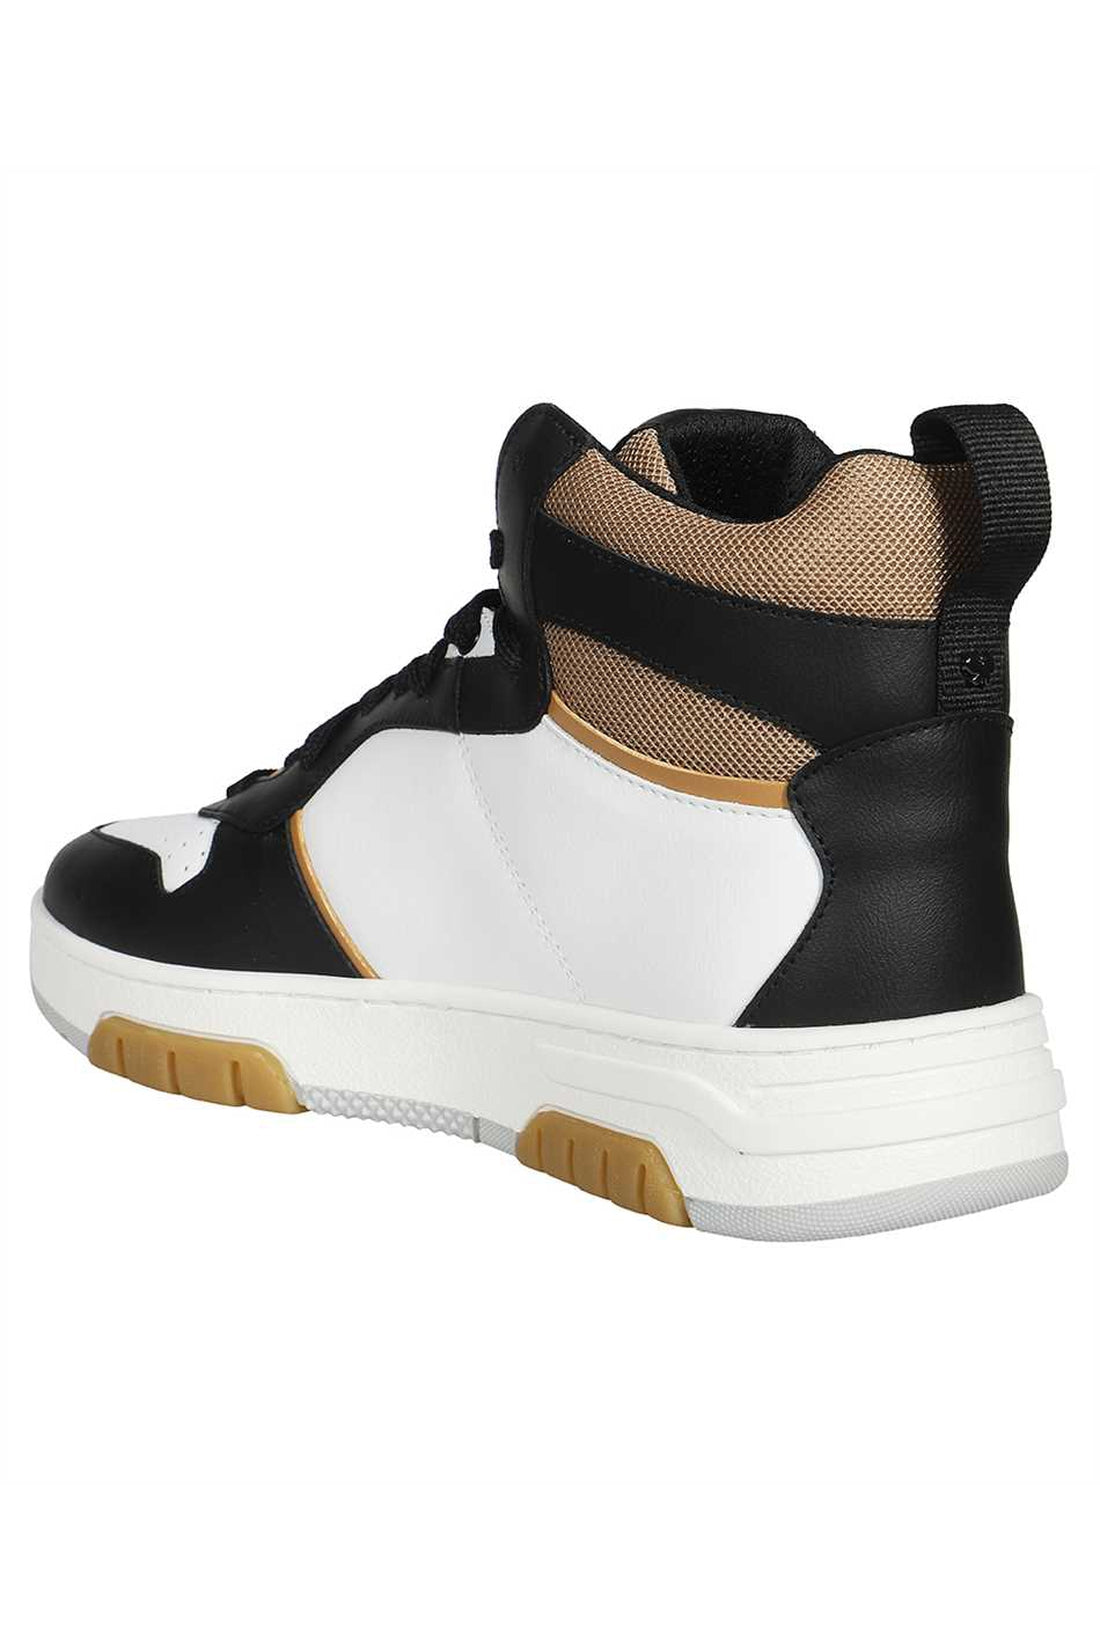 Max Mara-OUTLET-SALE-Miki high-top sneakers-ARCHIVIST